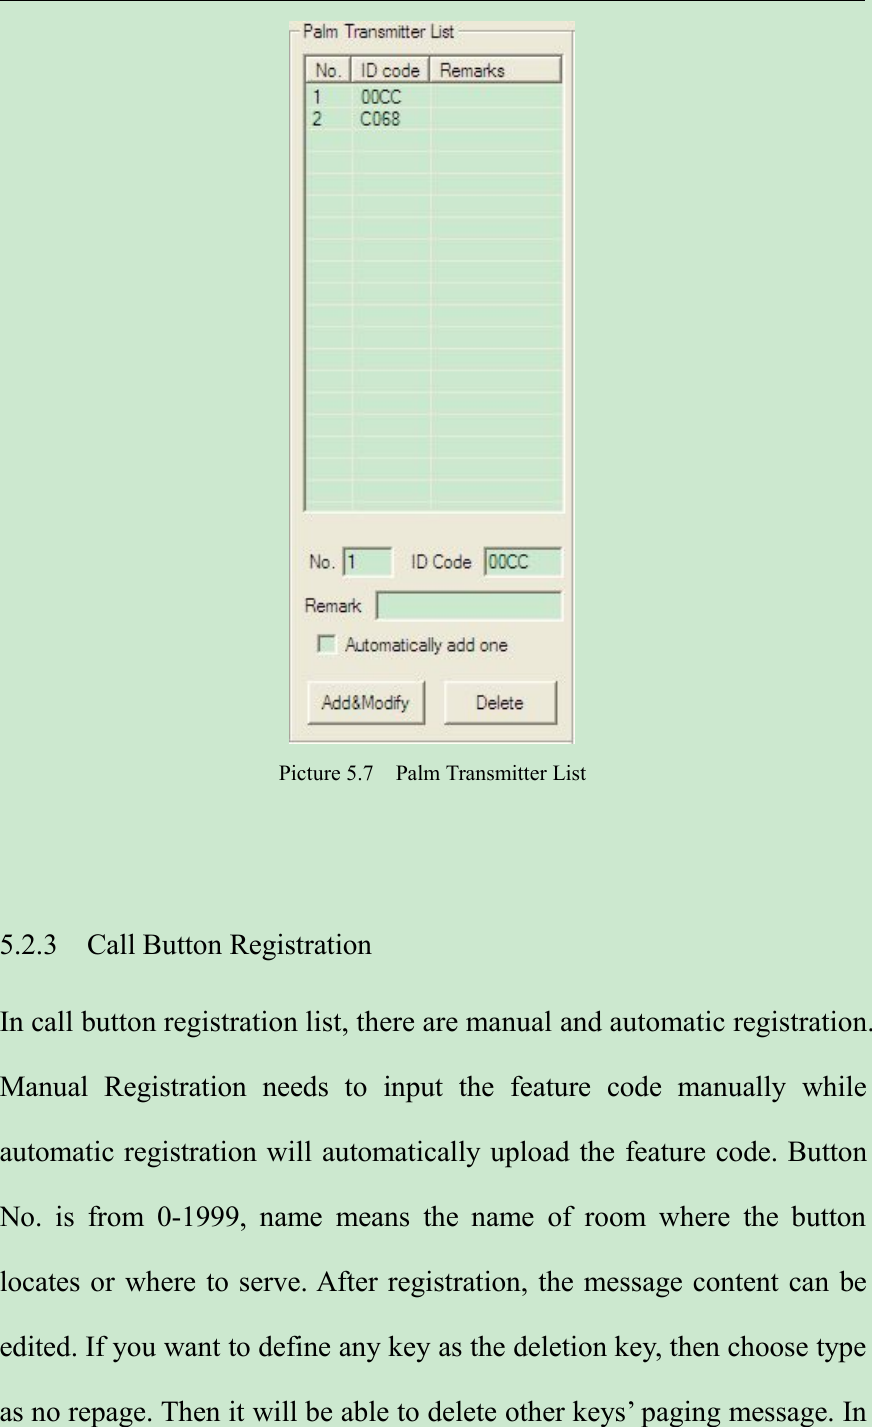 Picture 5.7 Palm Transmitter List5.2.3 Call Button RegistrationIn call button registration list, there are manual and automatic registration.Manual Registration needs to input the feature code manually whileautomatic registration will automatically upload the feature code. ButtonNo. is from 0-1999, name means the name of room where the buttonlocates or where to serve. After registration, the message content can beedited. If you want to define any key as the deletion key, then choose typeas no repage. Then it will be able to delete other keys’ paging message. In